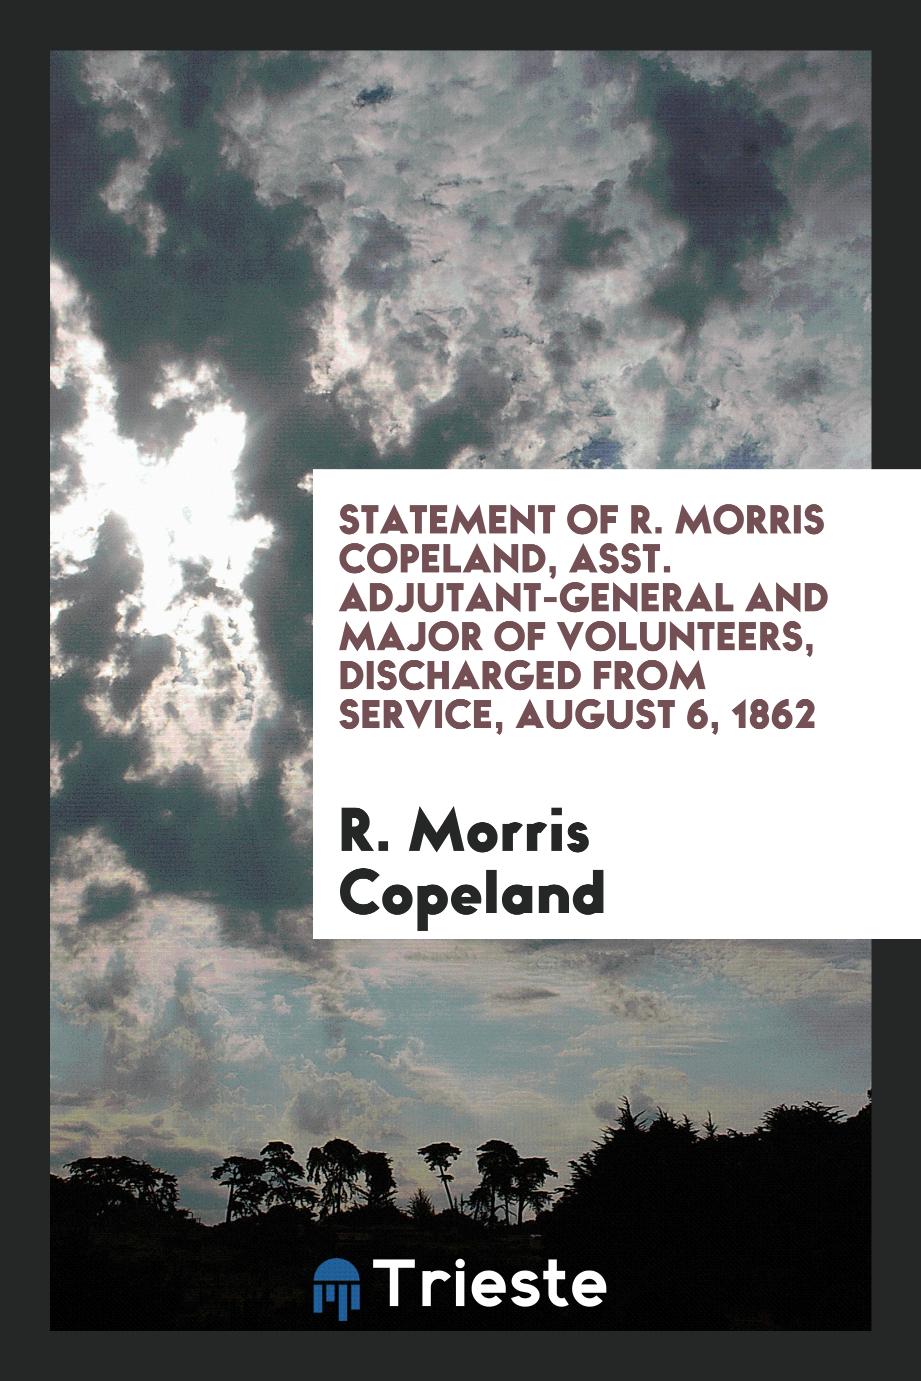 Statement of R. Morris Copeland, Asst. Adjutant-General and Major of Volunteers, discharged from service, august 6, 1862